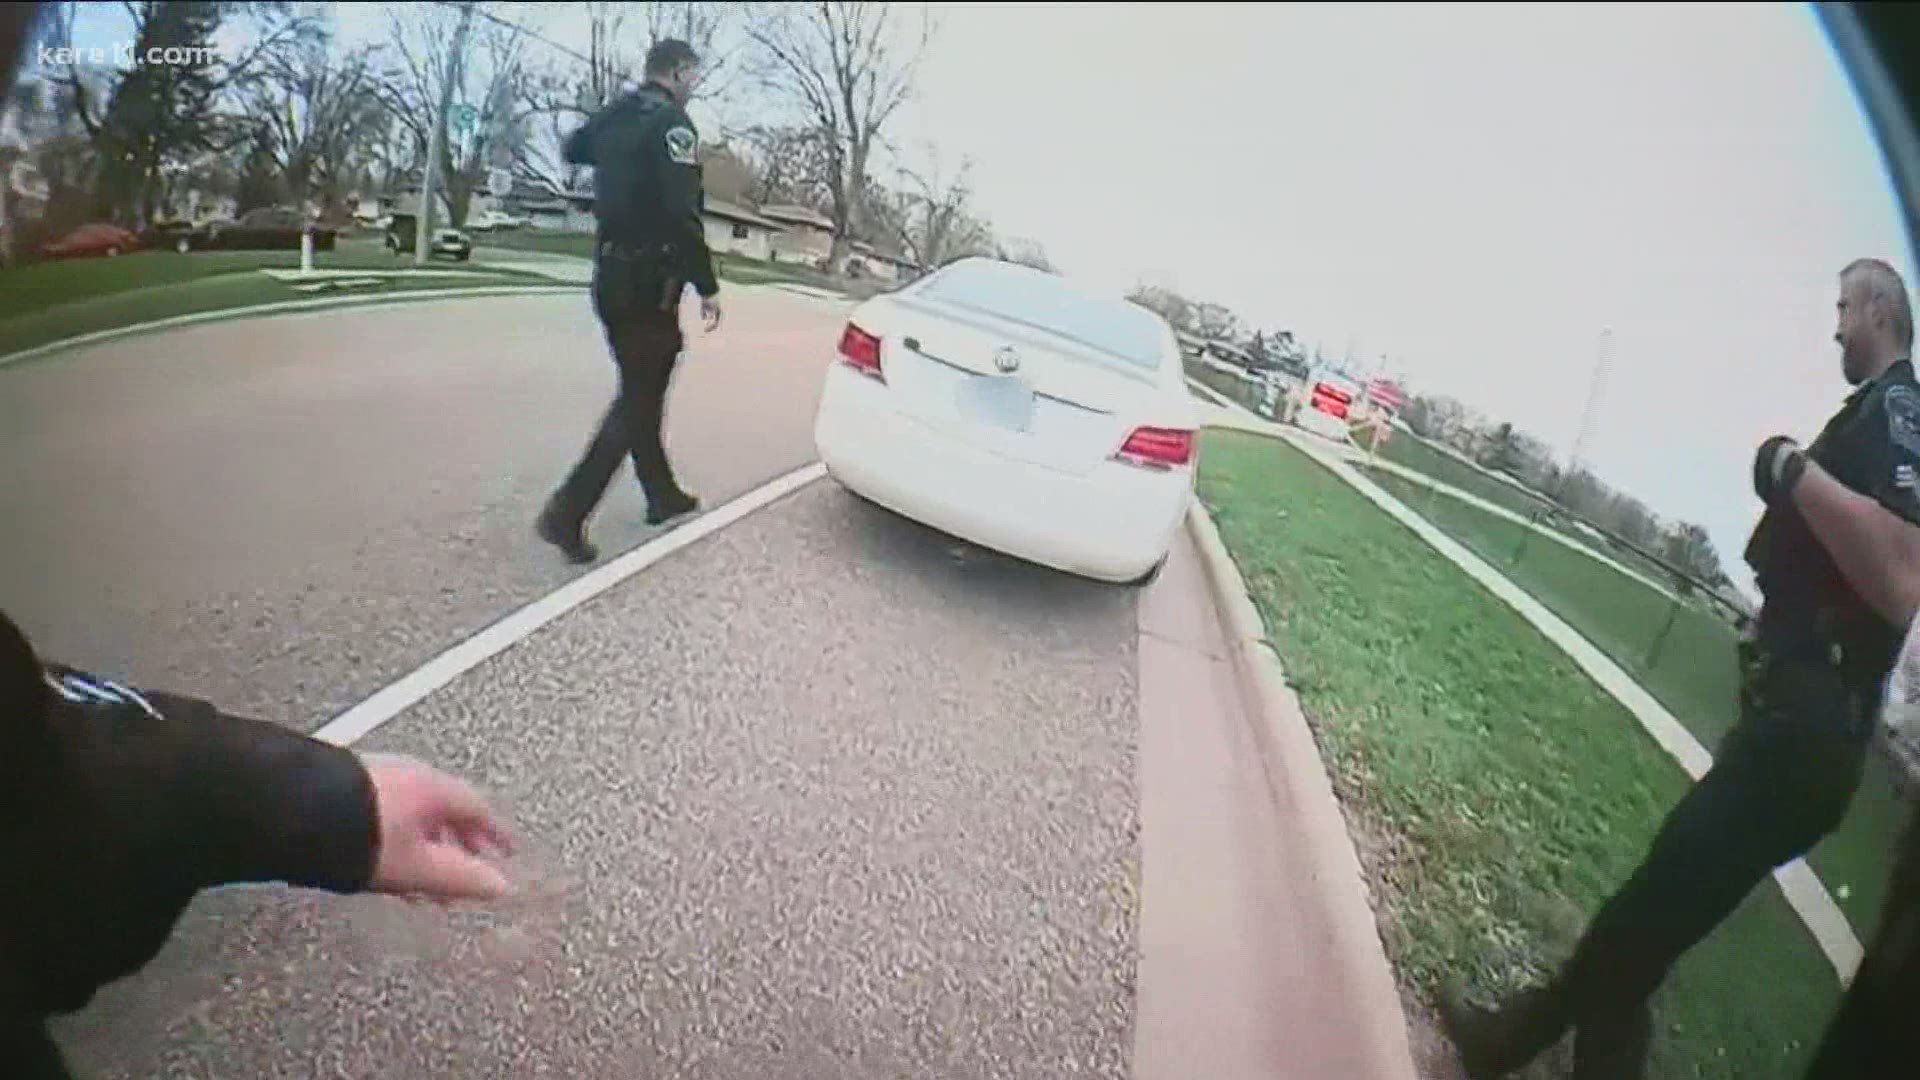 Karla Hult sat down with two law enforcement training experts to discuss what they see in police body camera video showing Daunte Wright's traffic stop.